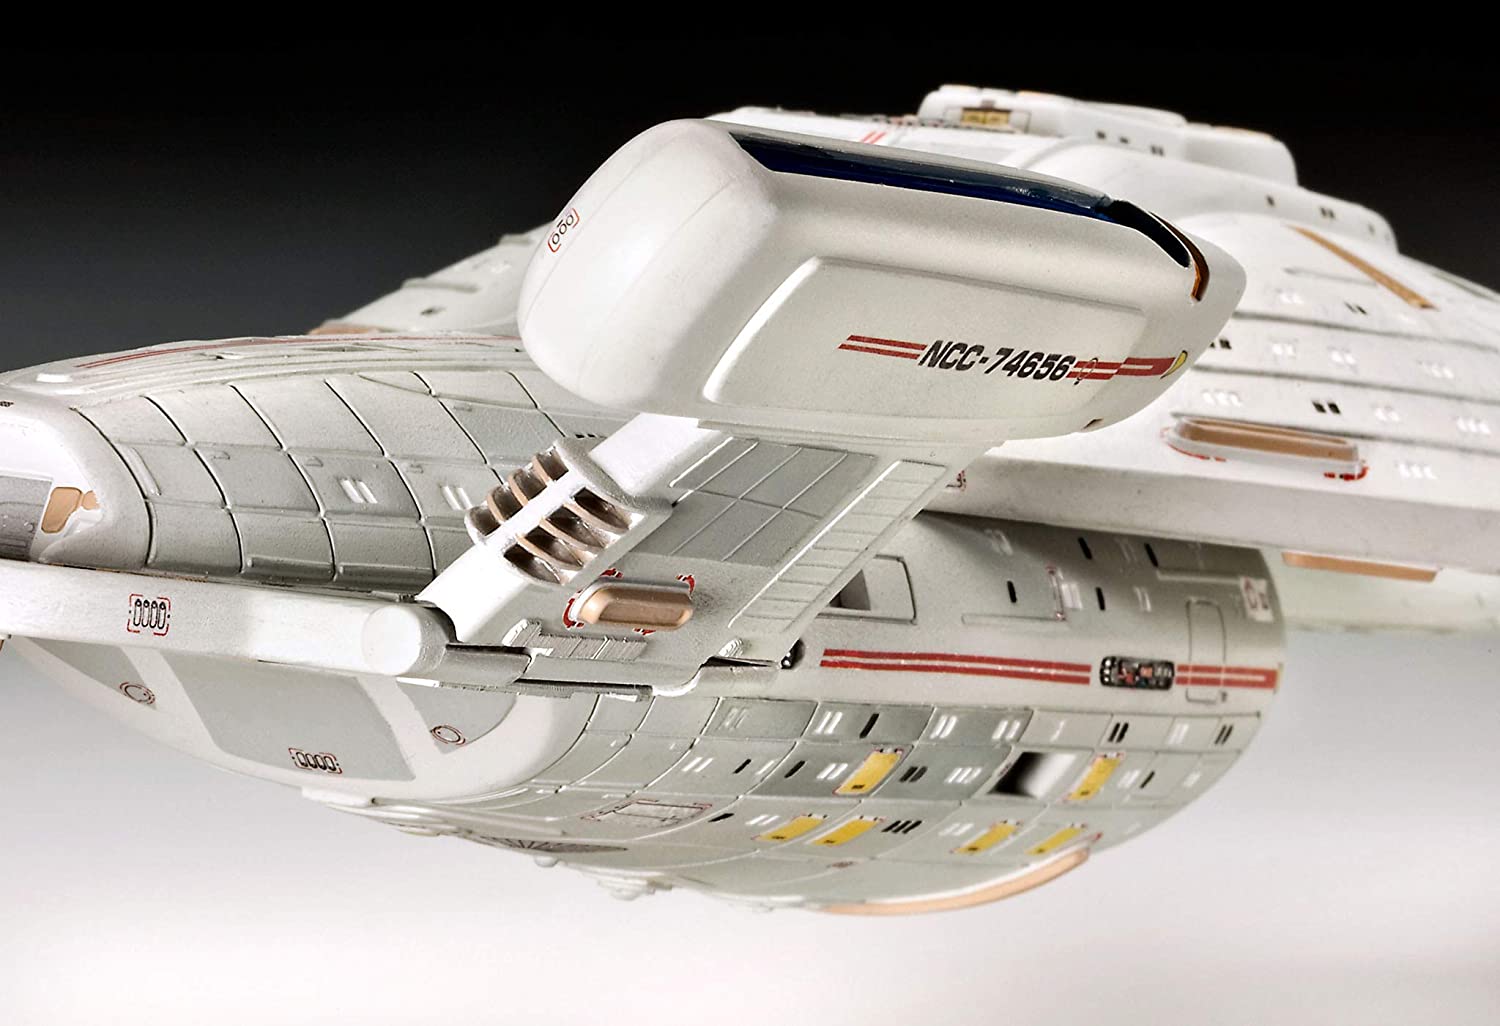 Revell 1/677 USS Voyager and diorama : r/StarTrekStarships